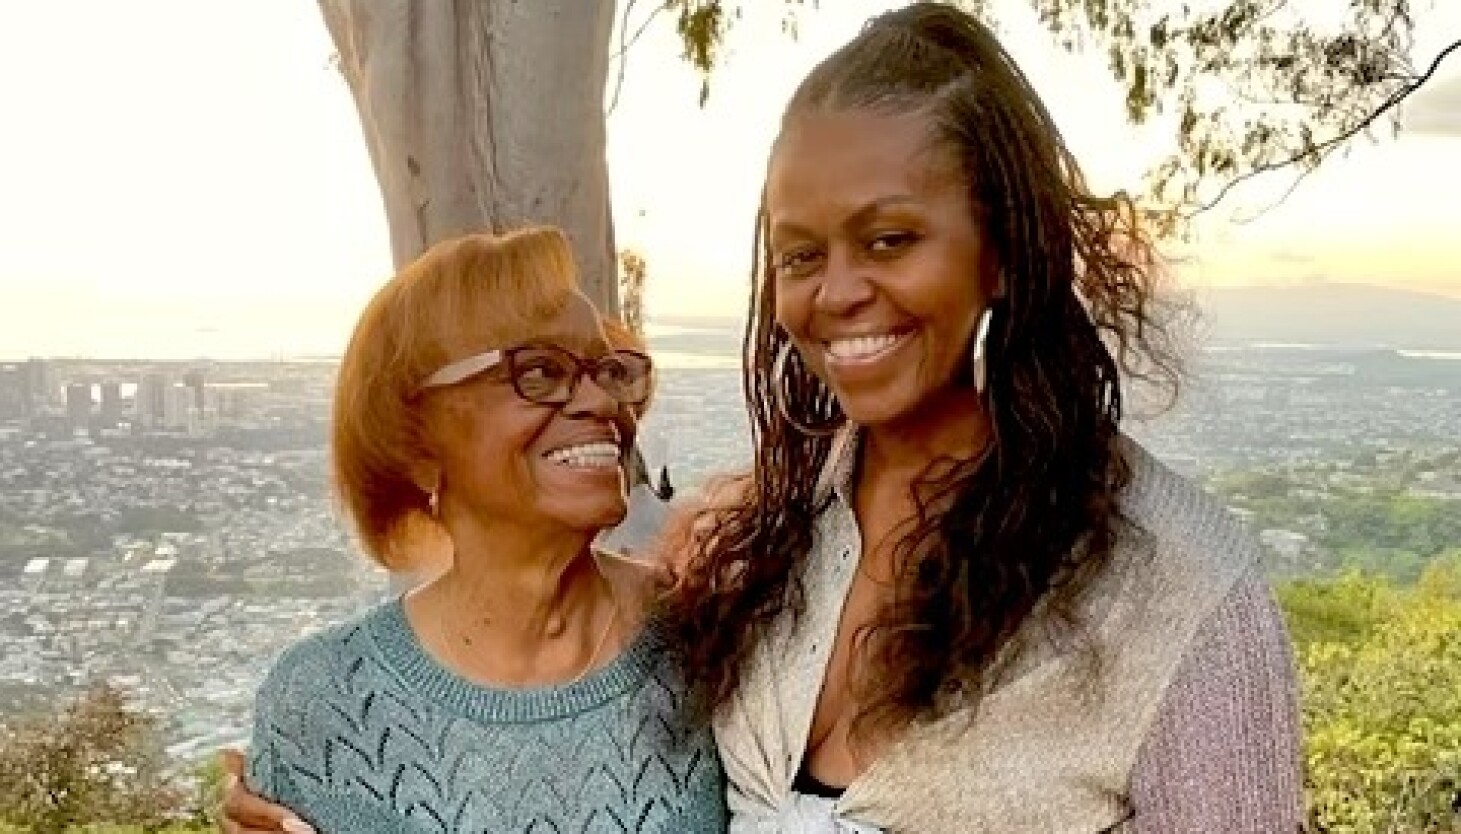 Michelle Obama's mother, Marian Shields Robinson, has died